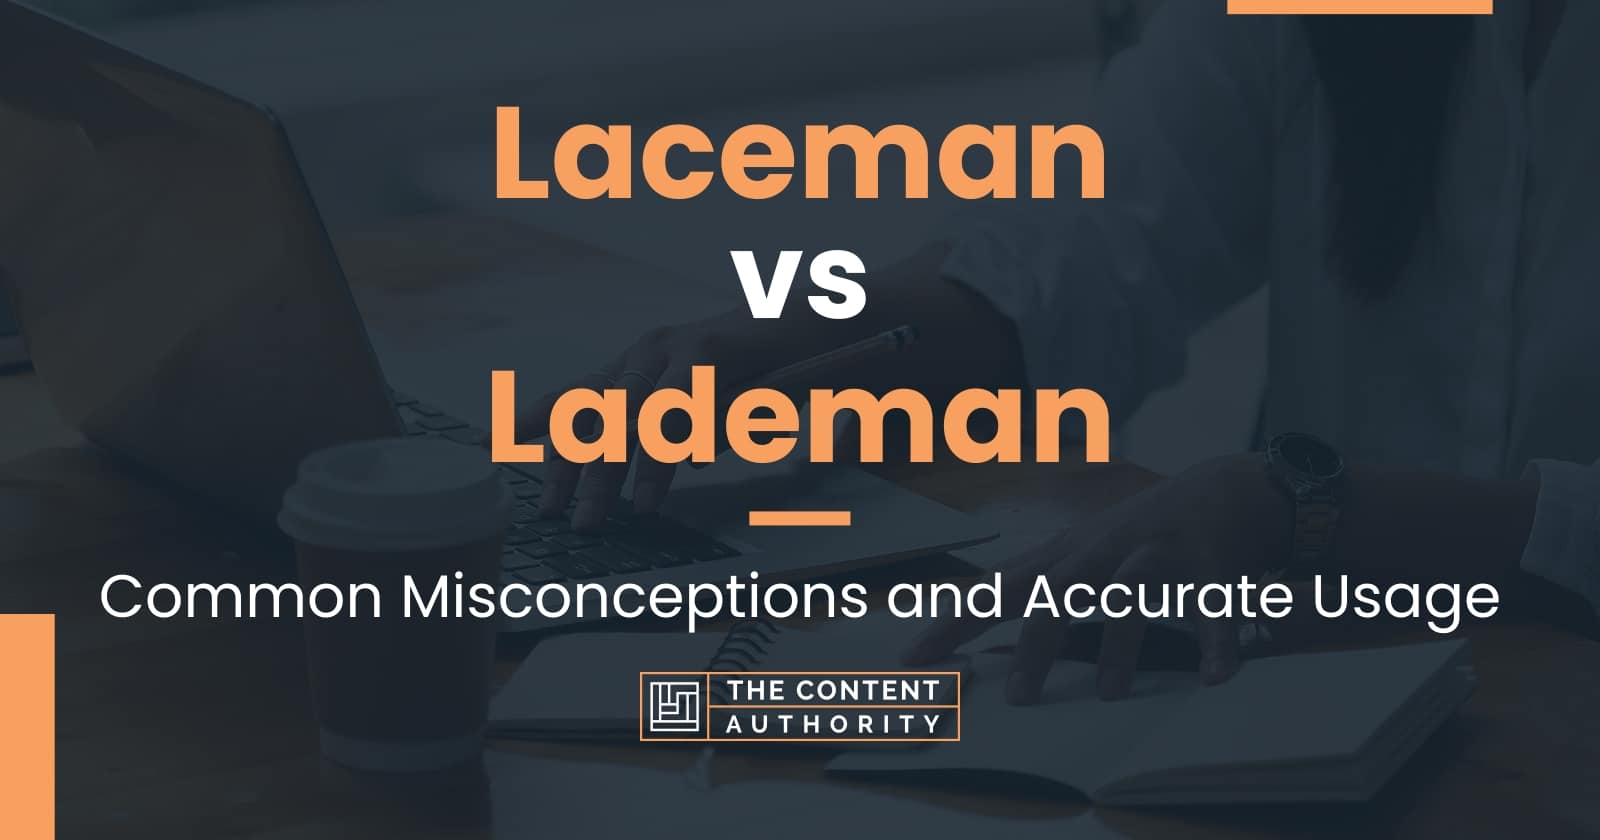 Laceman vs Lademan: Common Misconceptions and Accurate Usage